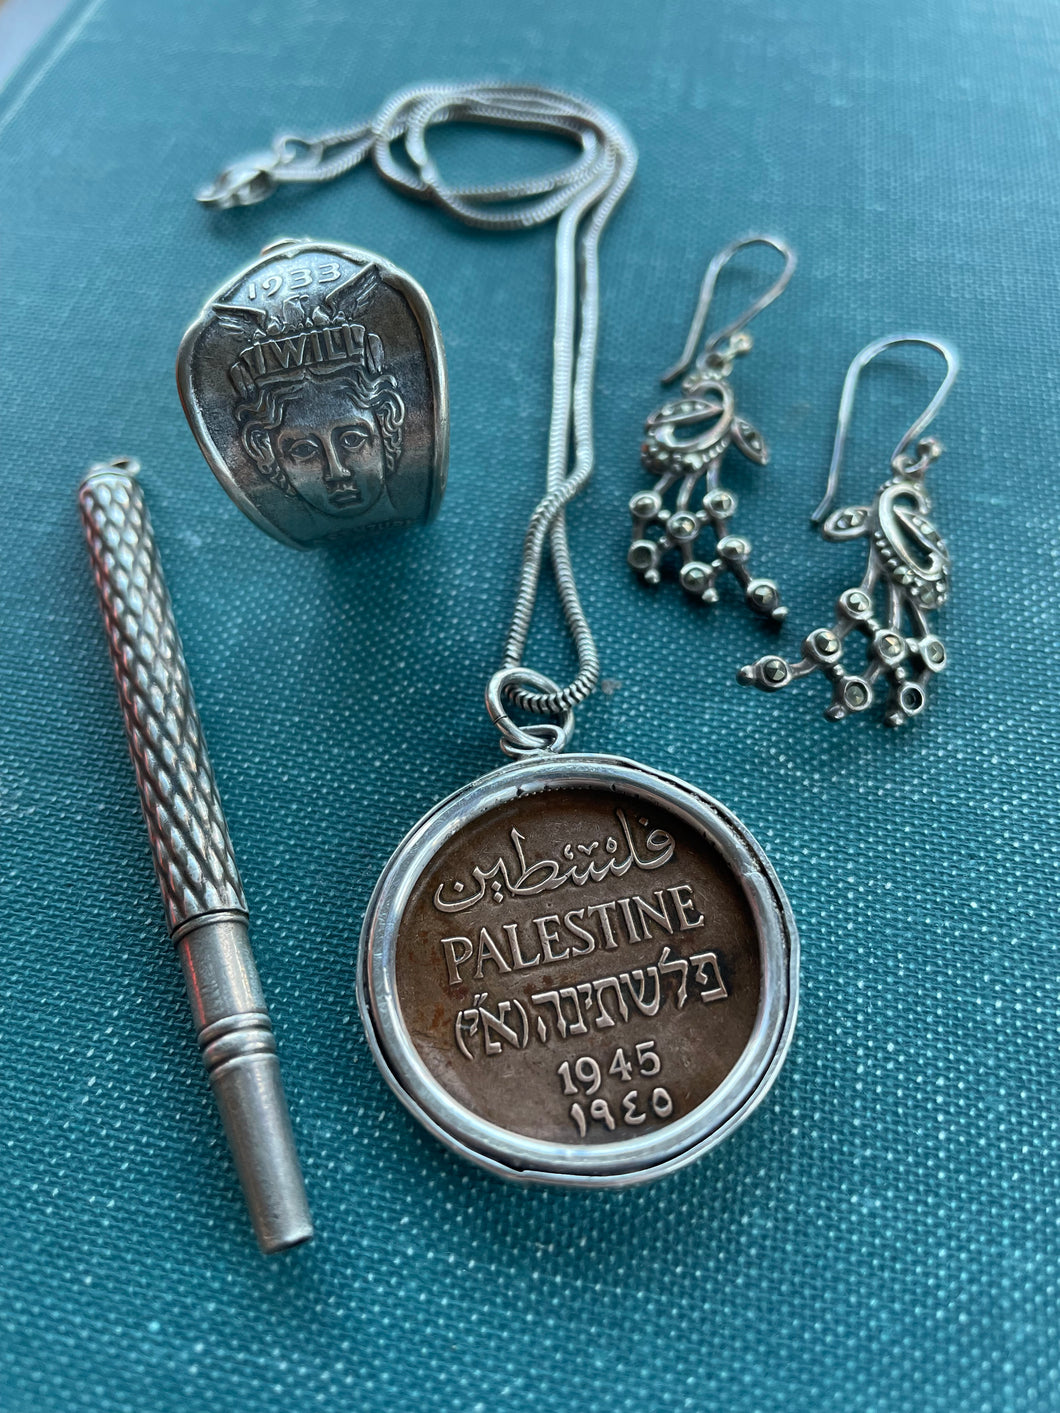 100% OF SALE TO OPERATION OLIVE BRANCH - Bundle #1: 1945 Palestine Coin Pendant Necklace, Marcasite Peacock Earrings, Small Sterling Pencil Pendant and 1933 Valkyrie World’s Fair Spoon Ring